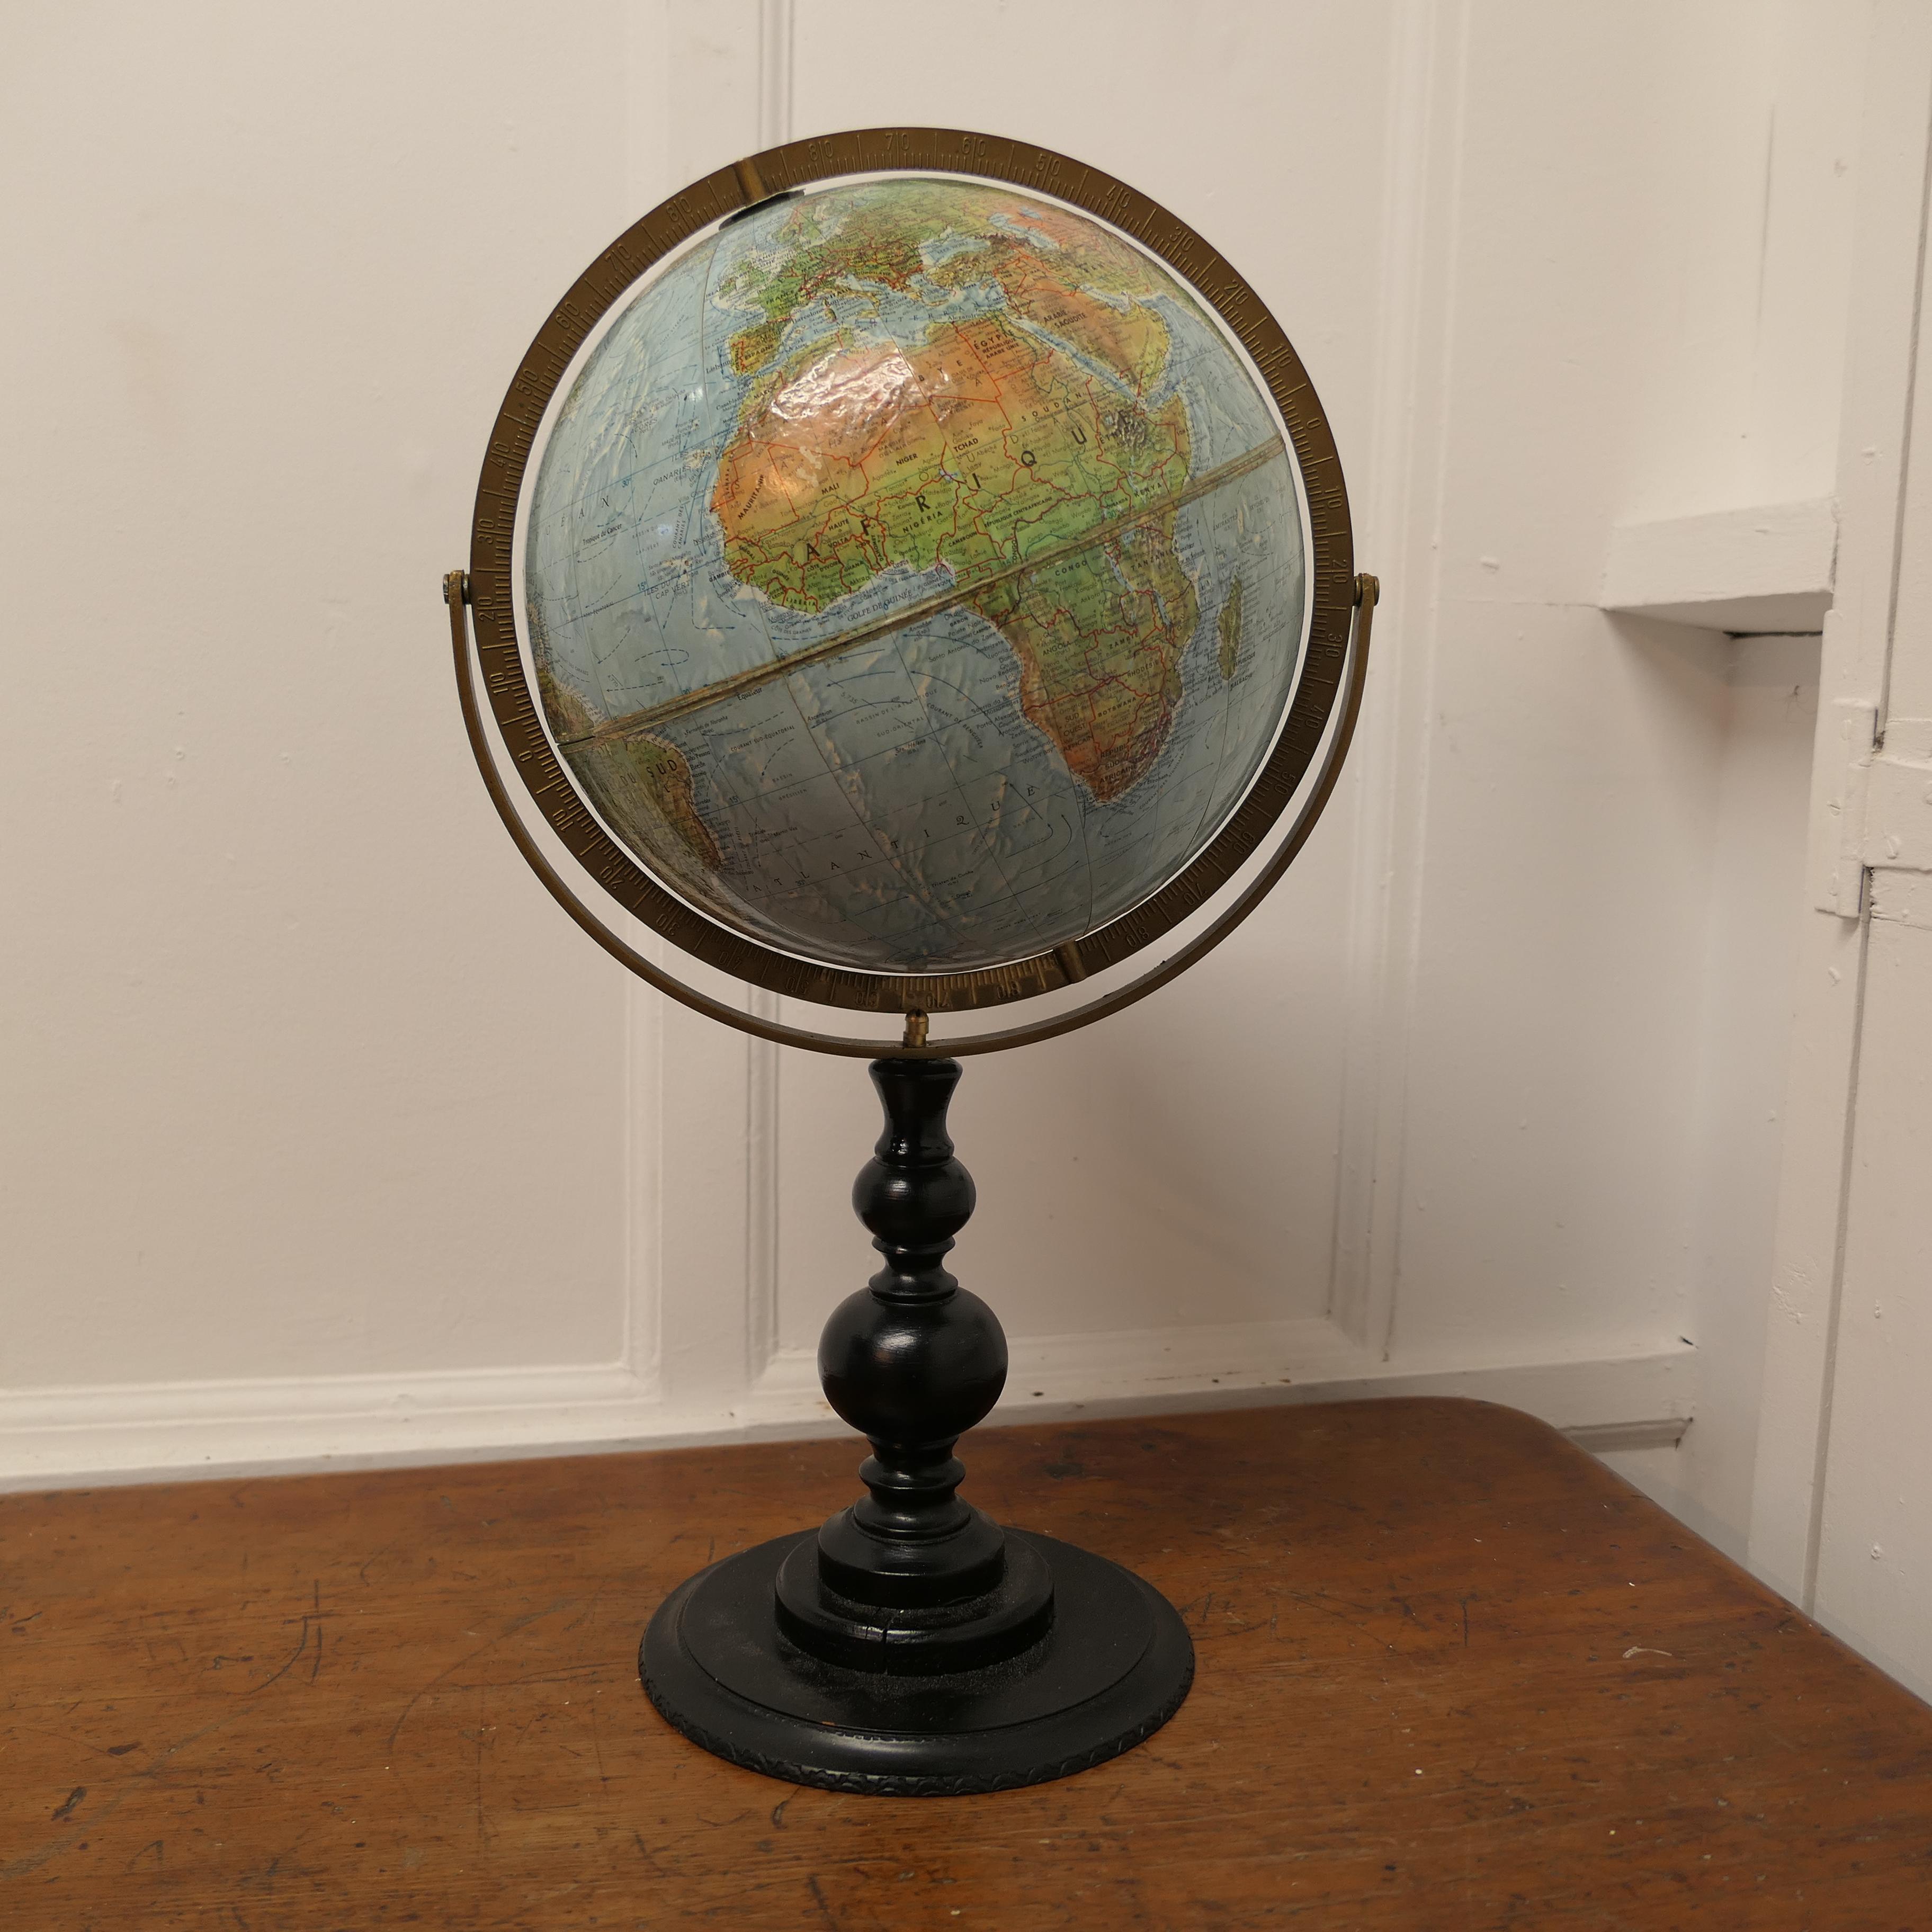 Double Axis Scan Globe A/S with Raised Topography
A good quality Desk Scan Globe A/S (©Replogle Chicago, Hassing Kopenhagen Corporation) in Denmark, with a double axis, rotating protractors and relief raised map surface. The globe is set on a turned